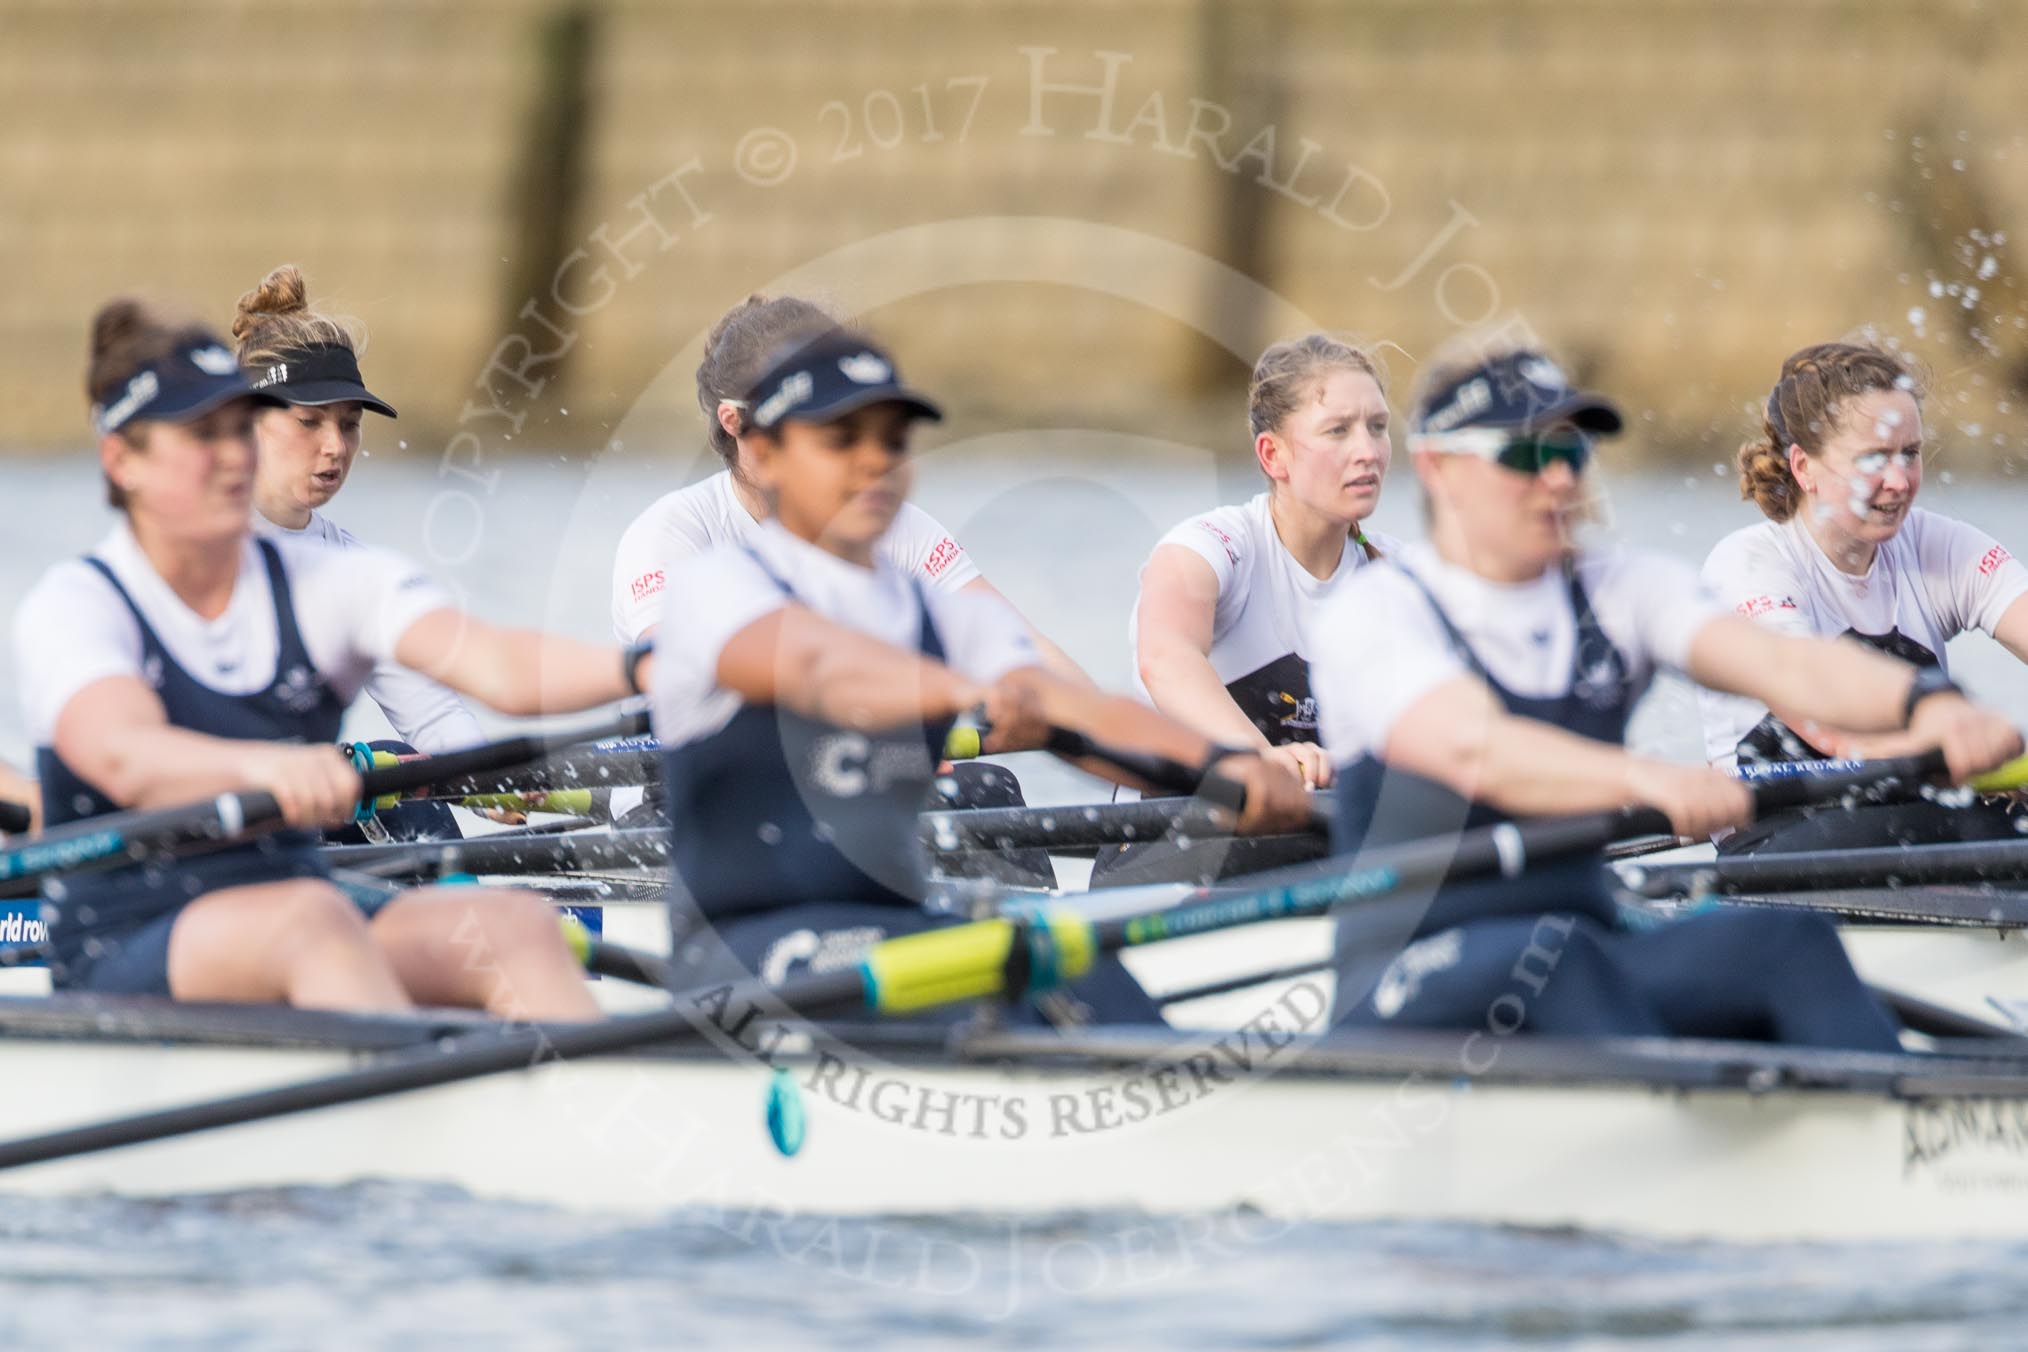 The Cancer Research UK Boat Race season 2017 - Women's Boat Race Fixture OUWBC vs Molesey BC: OUWBC with a lead of around half a length in the milepost area.
River Thames between Putney Bridge and Mortlake,
London SW15,

United Kingdom,
on 19 March 2017 at 16:03, image #68